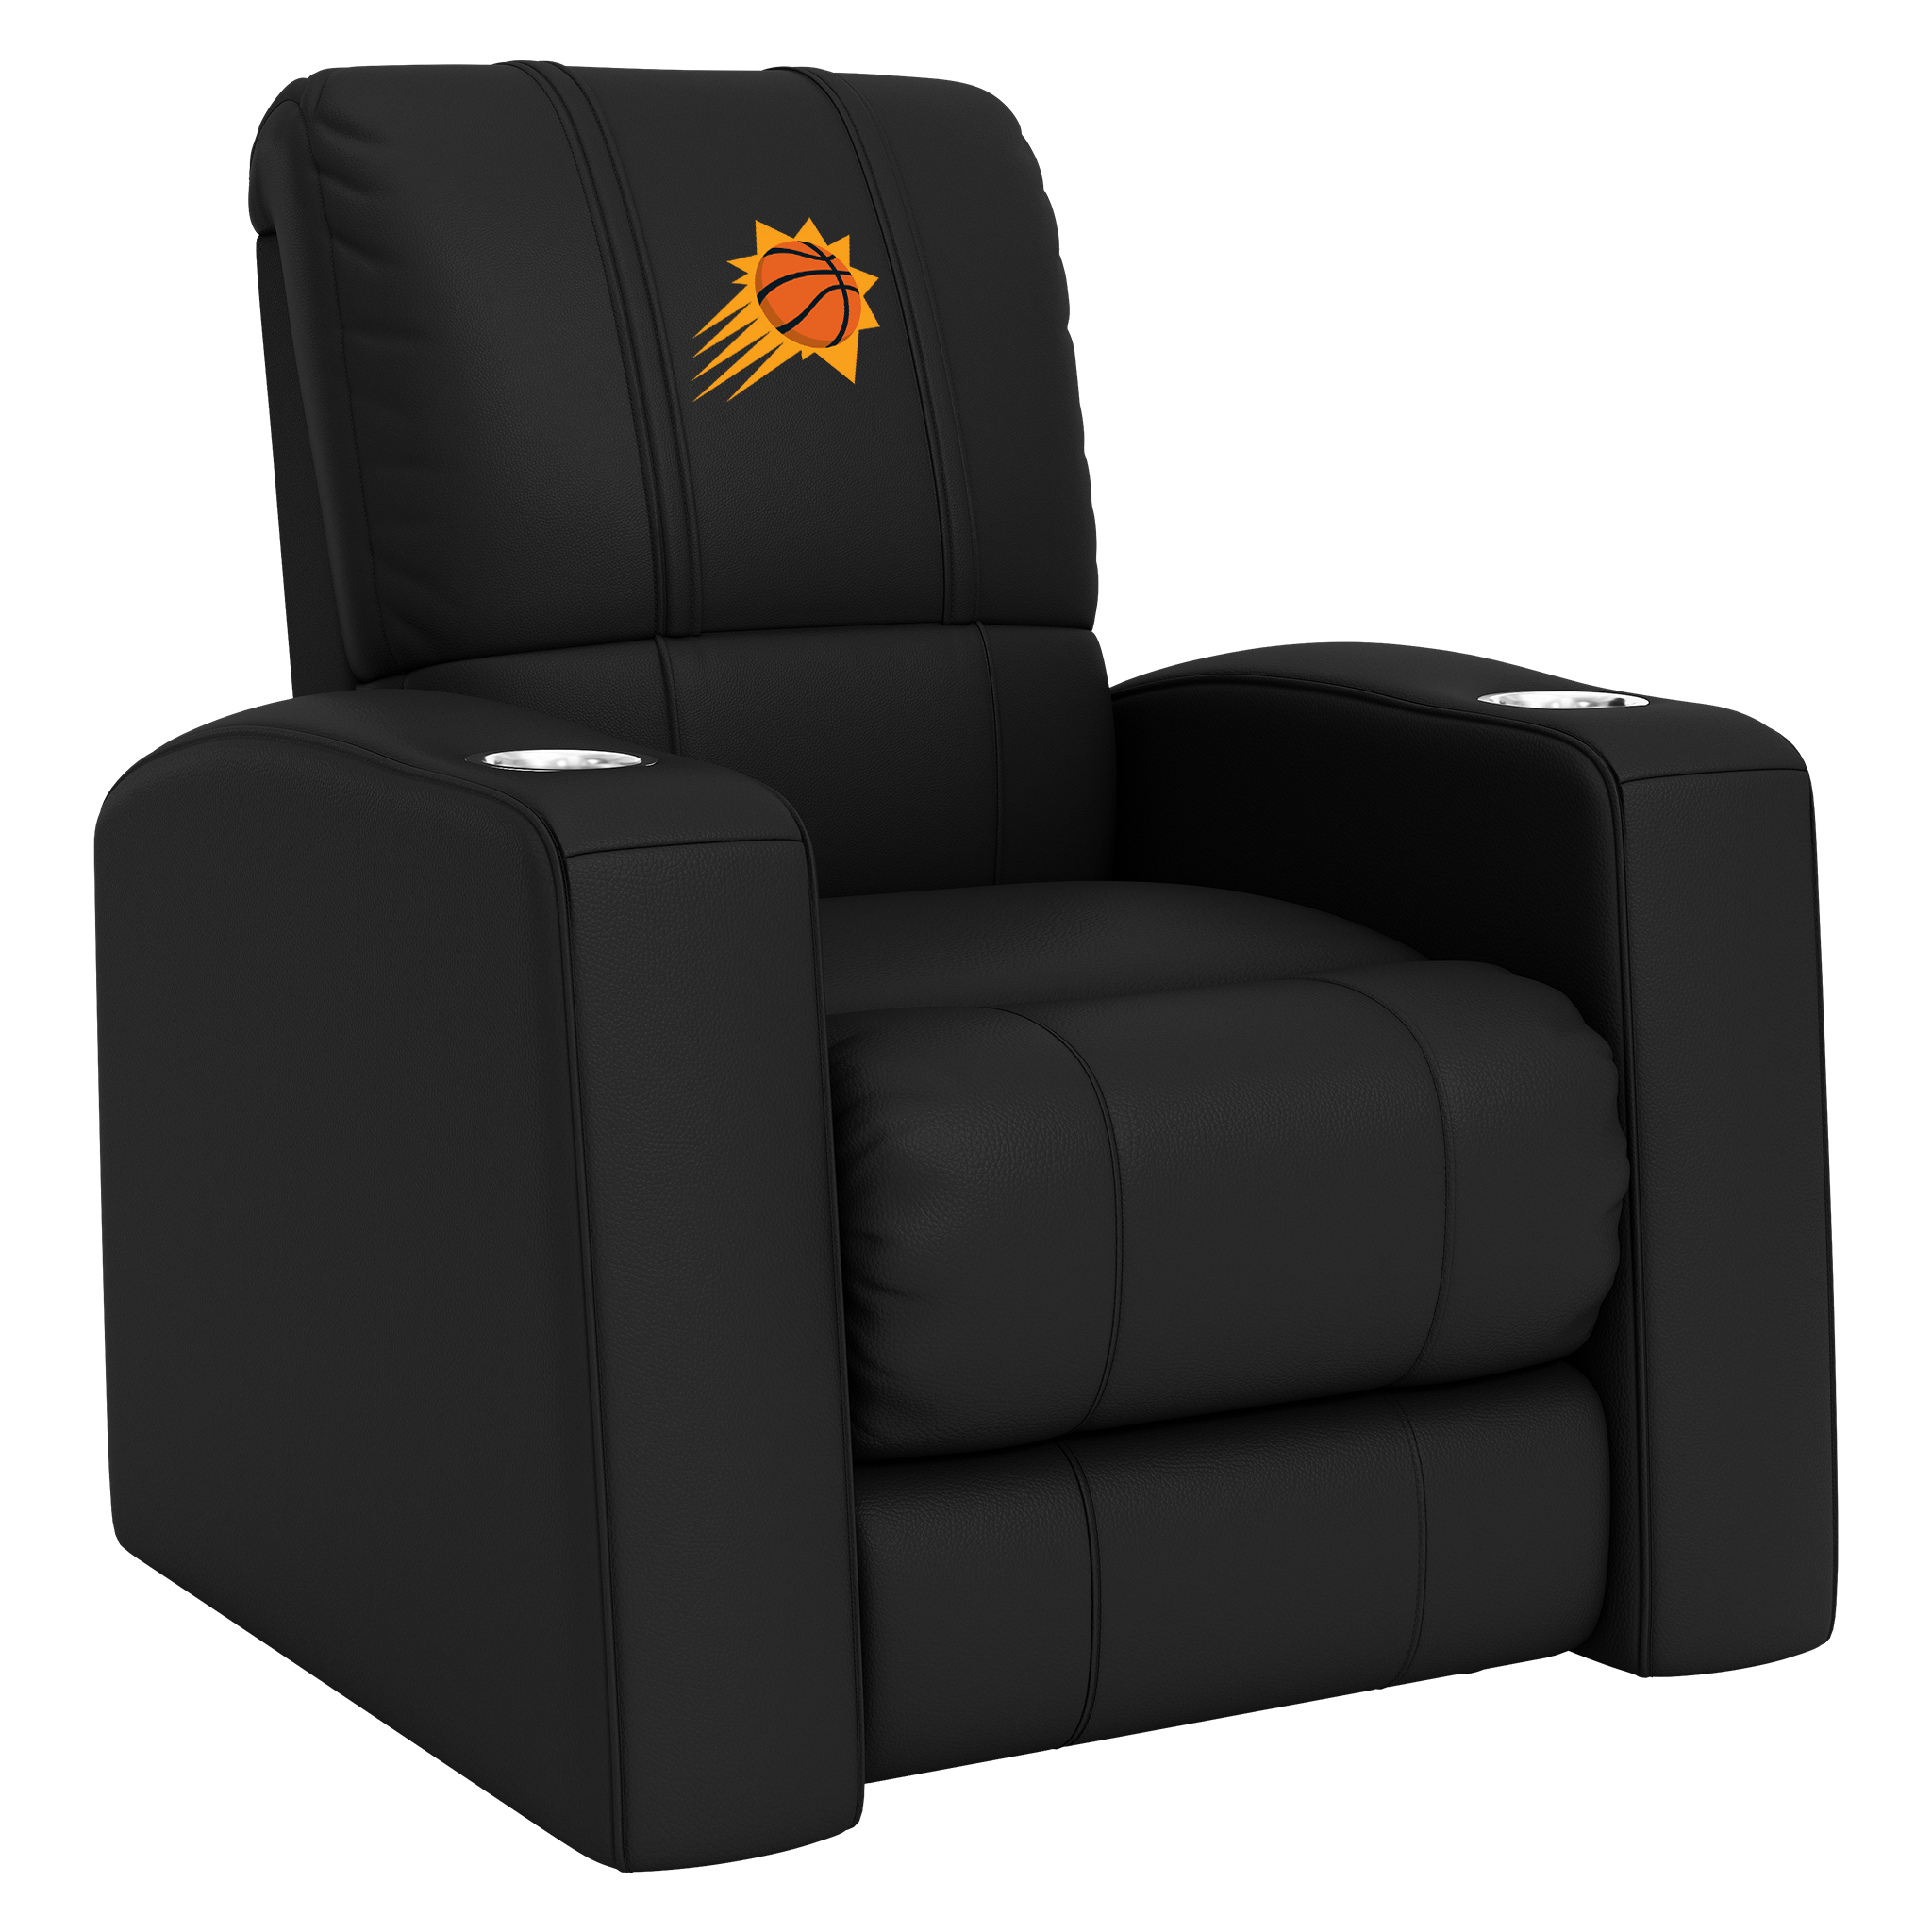 Phoenix Suns Home Theater Recliner with Phoenix Suns Primary